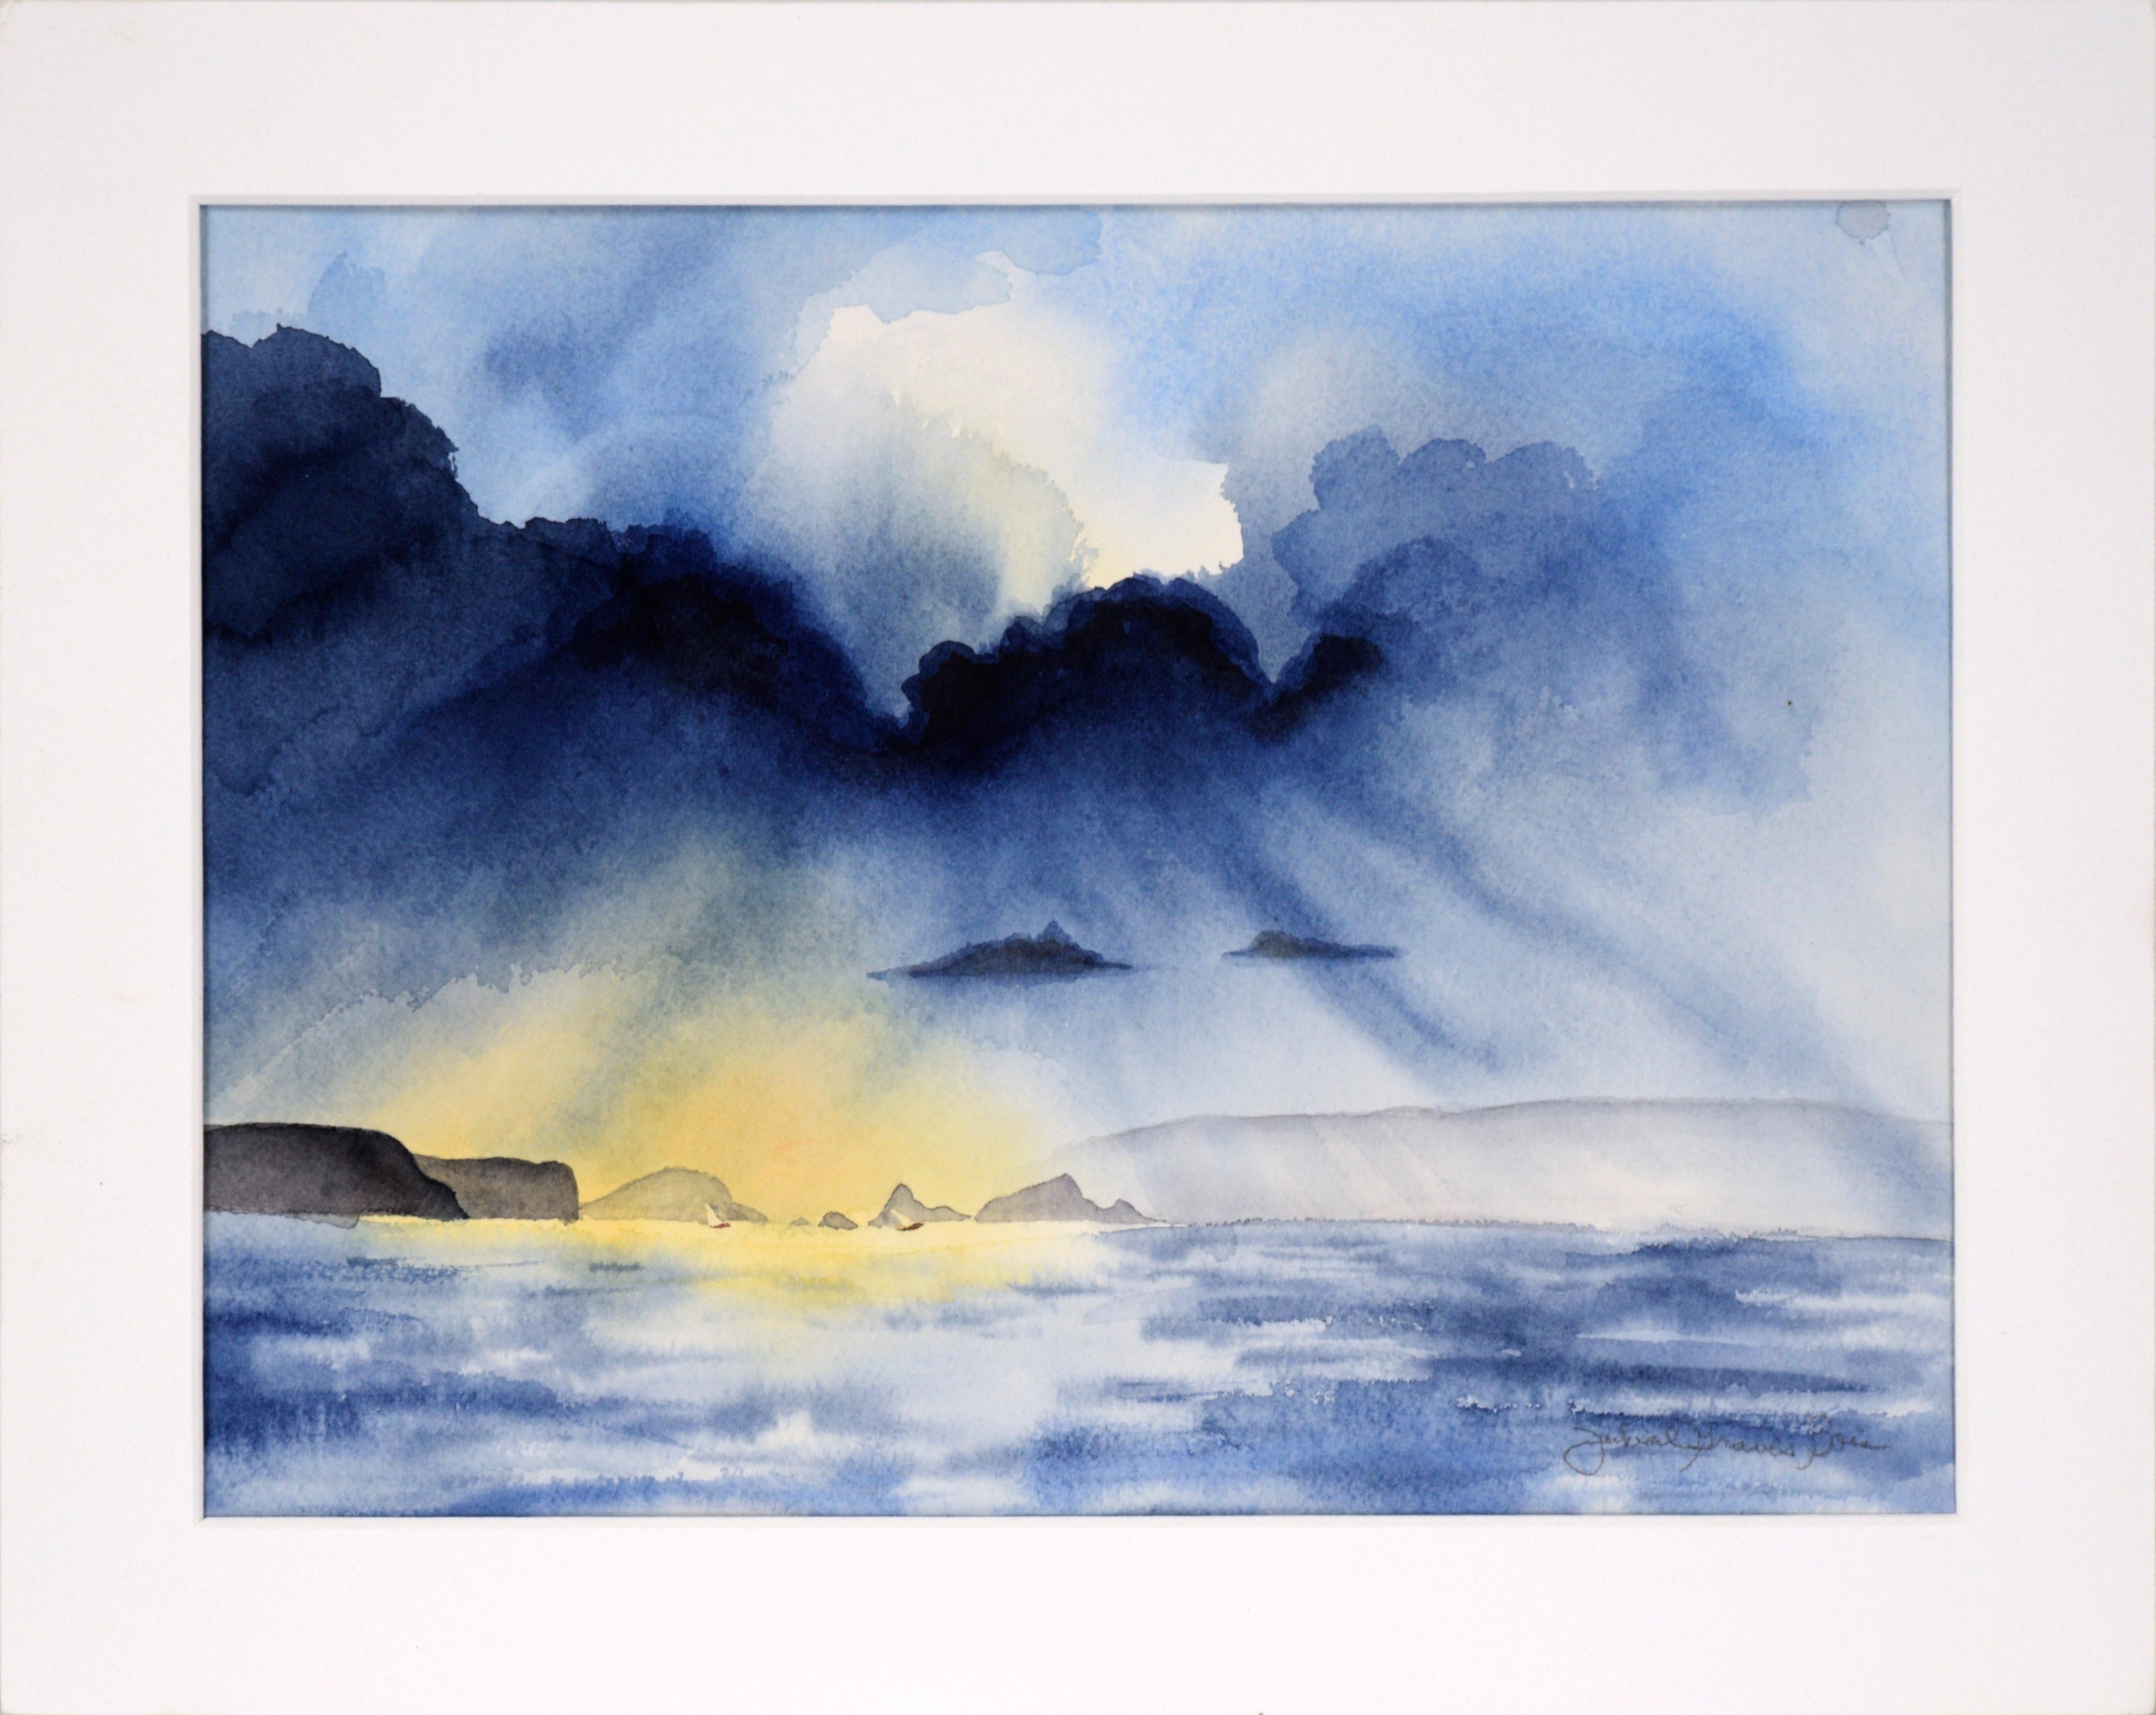 Unknown Landscape Art - Rays of Sun Through the Clouds - Seascape